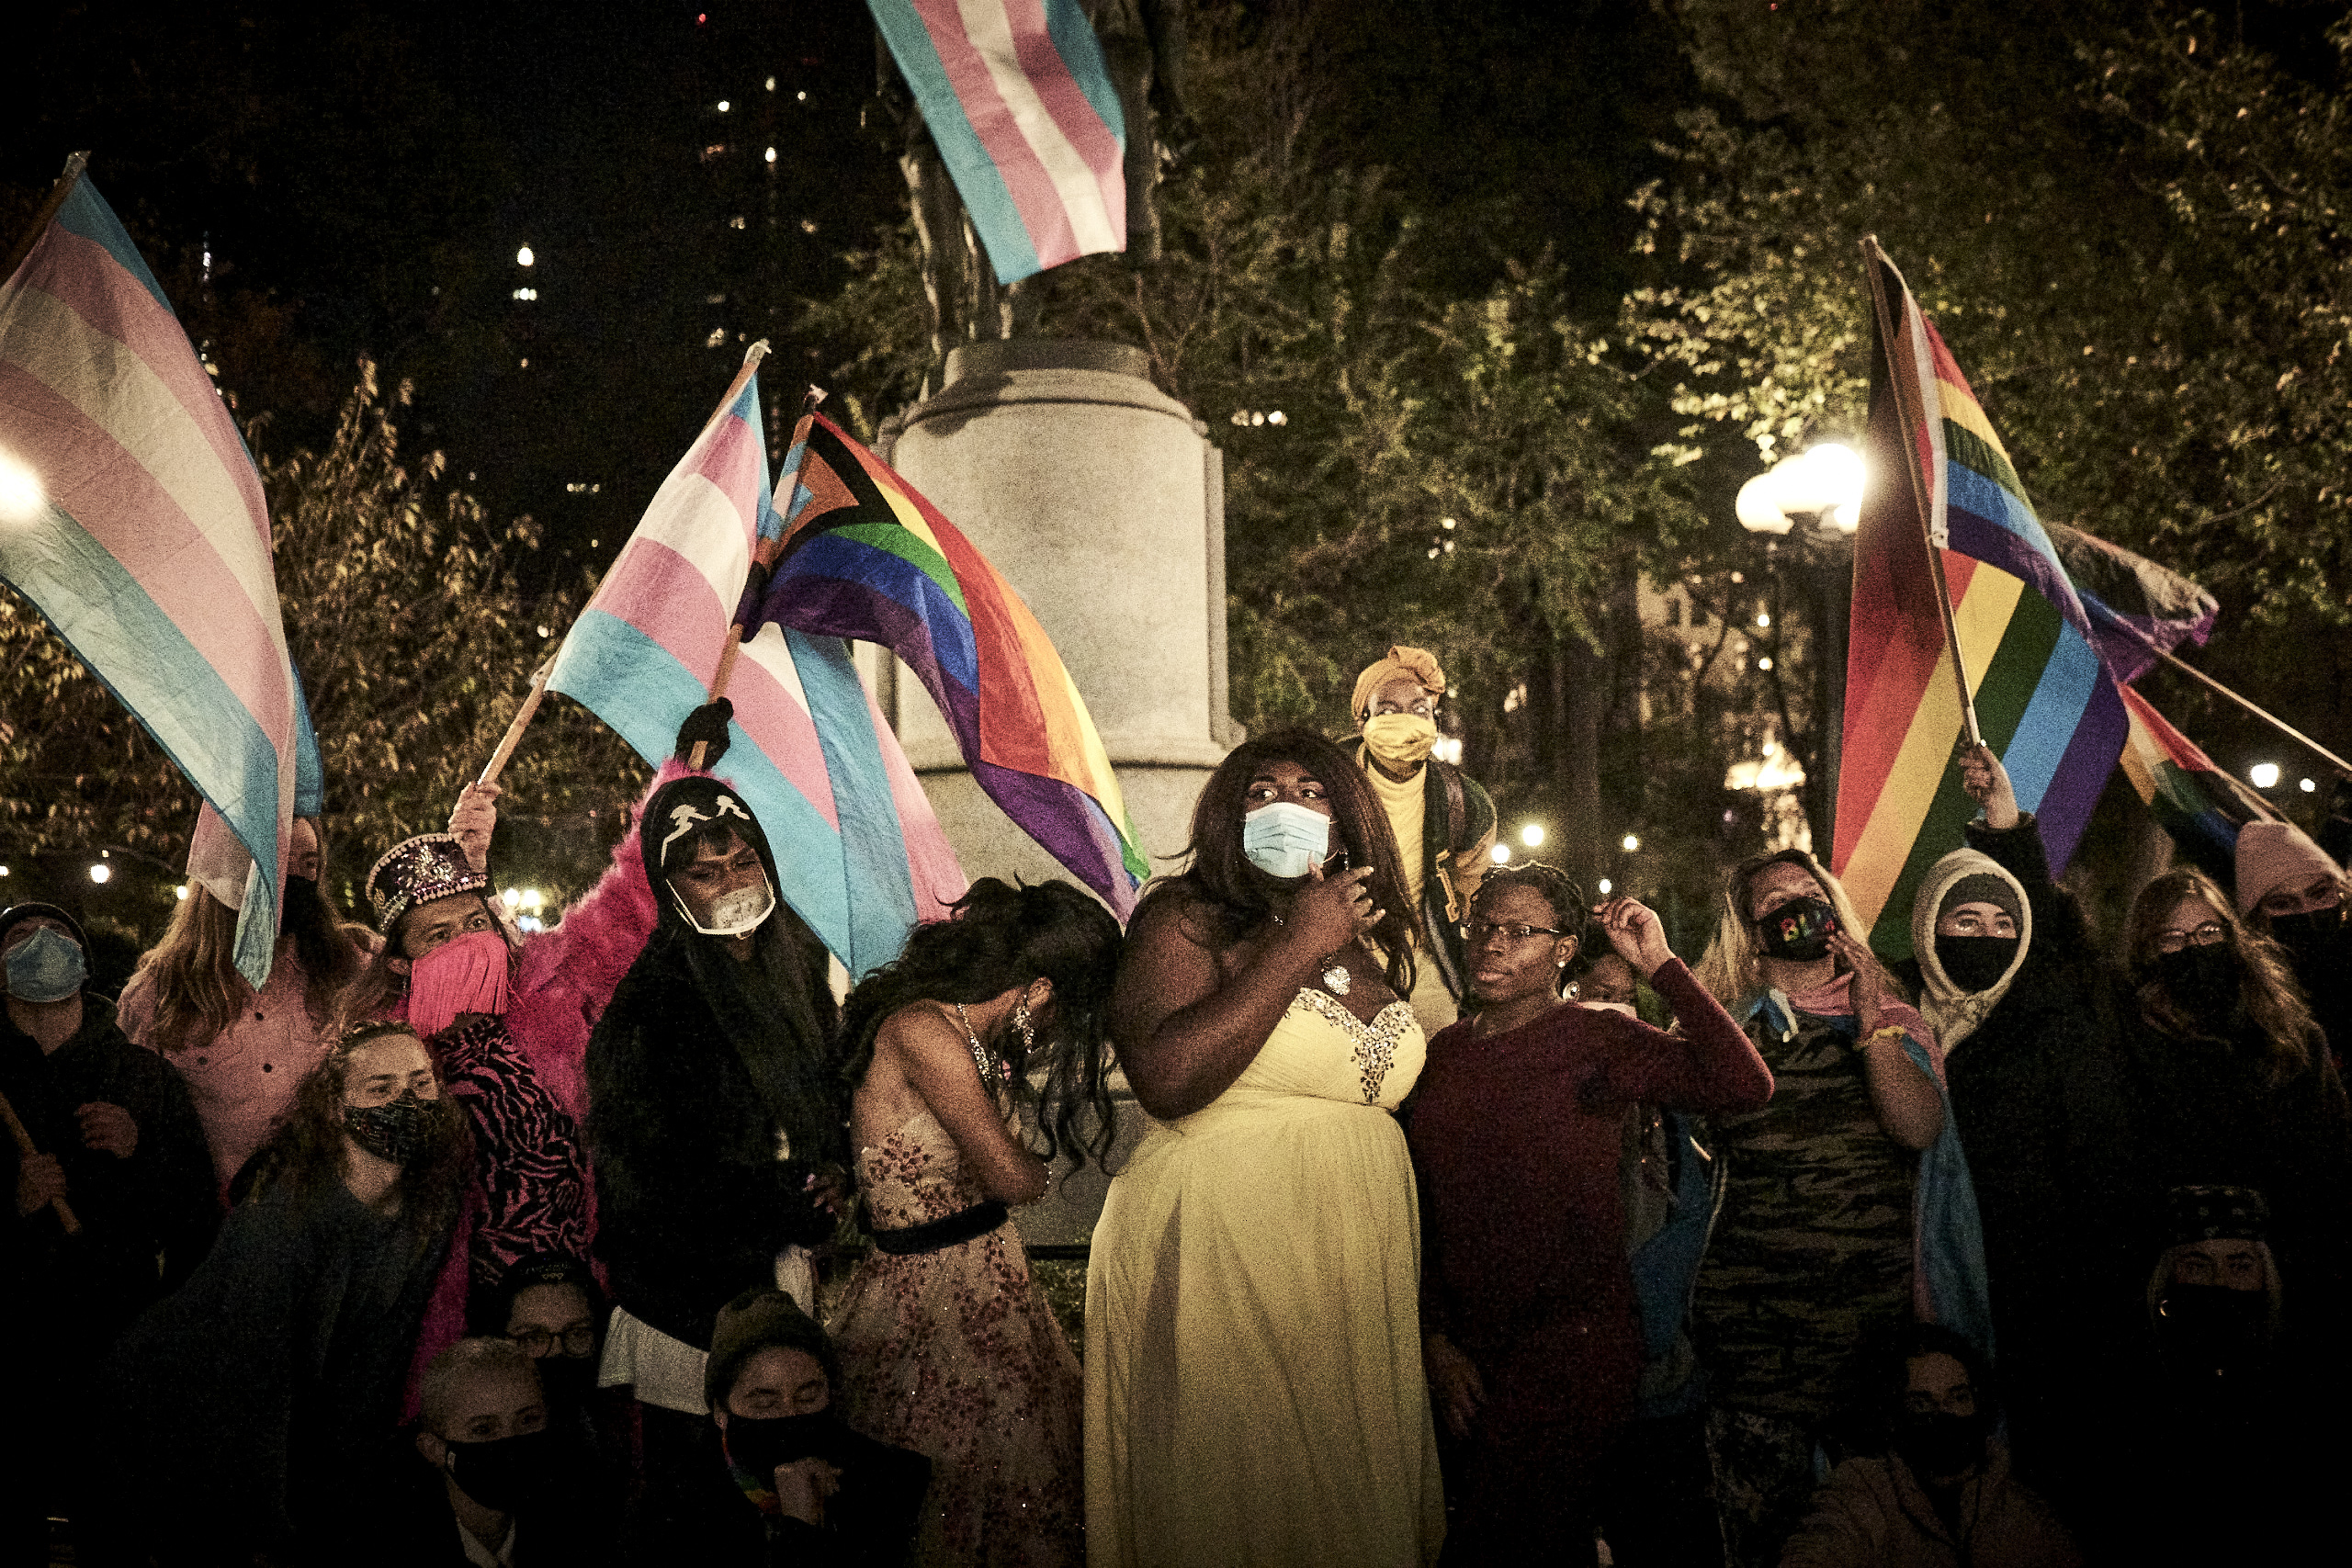 20201119-1_NYC_Protests_Stonewall_04_0959_SeanWaltrous